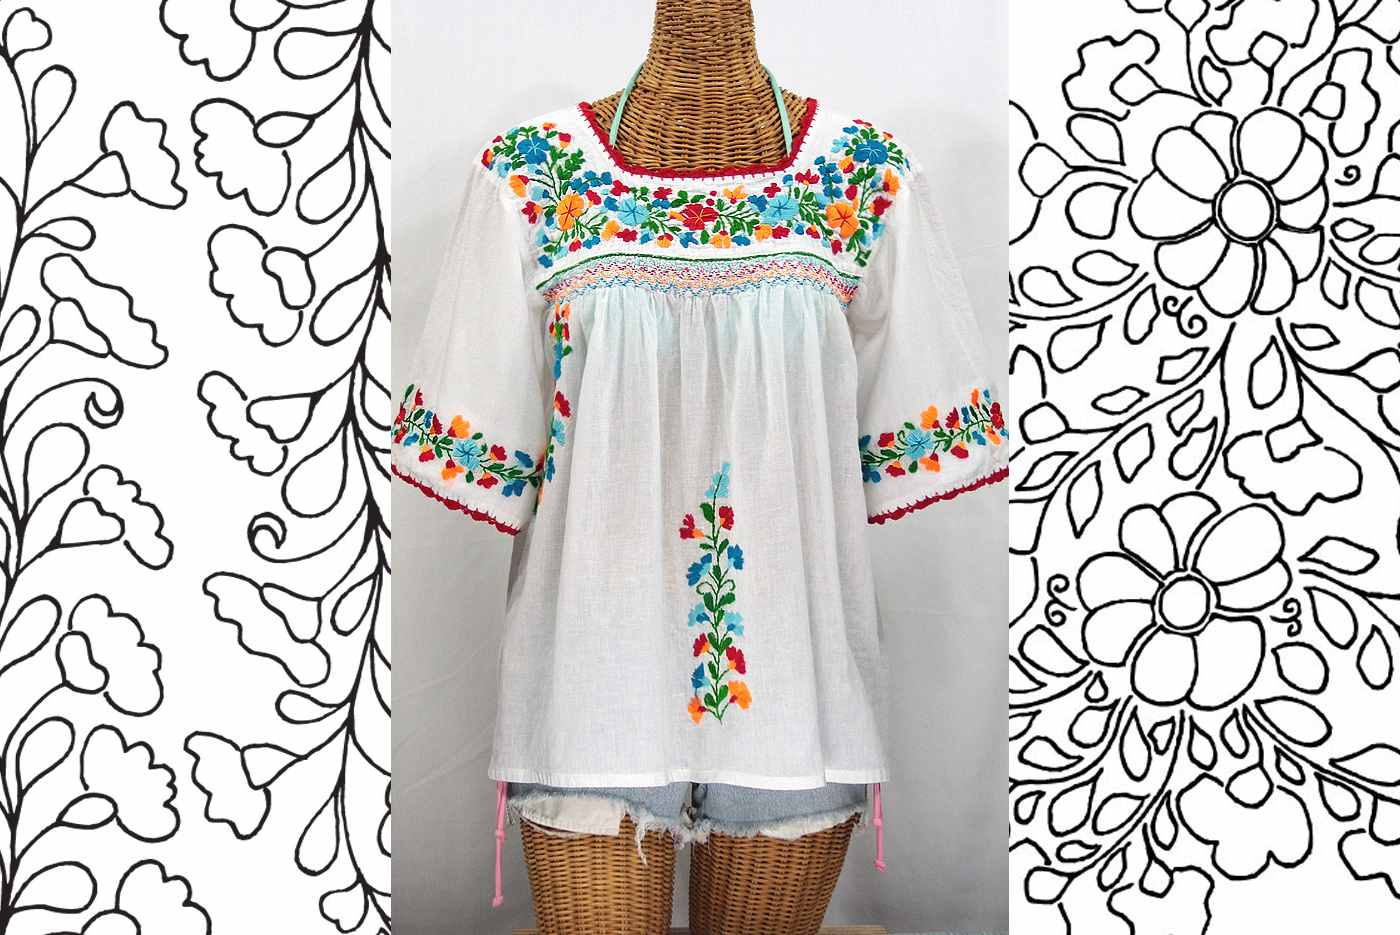 Mexican Embroidery Patterns Ethnic And Multicultural Embroidery Patterns